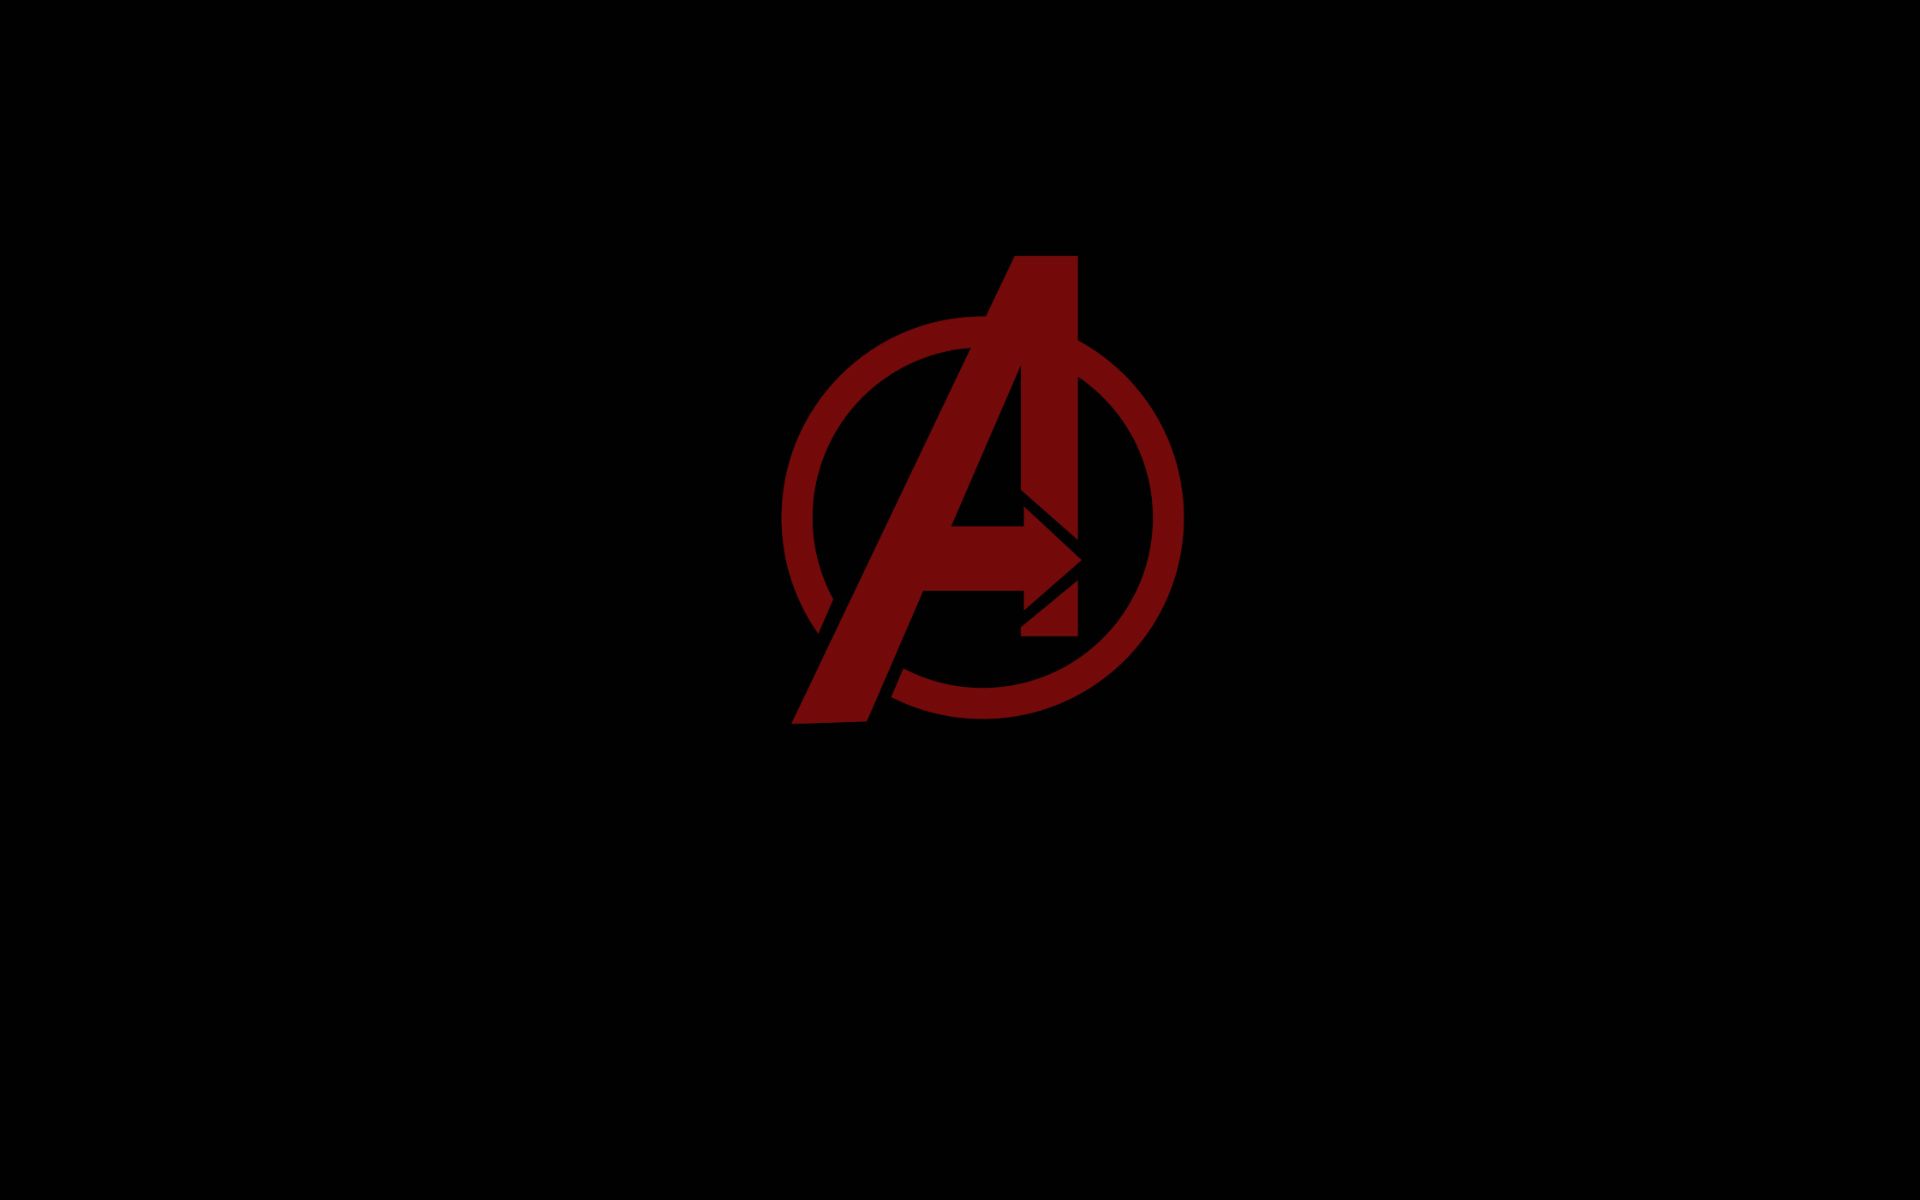 Free download 50 Avengers Symbol Wallpapers Download at WallpaperBro [1920x1200] for your Desktop, Mobile & Tablet